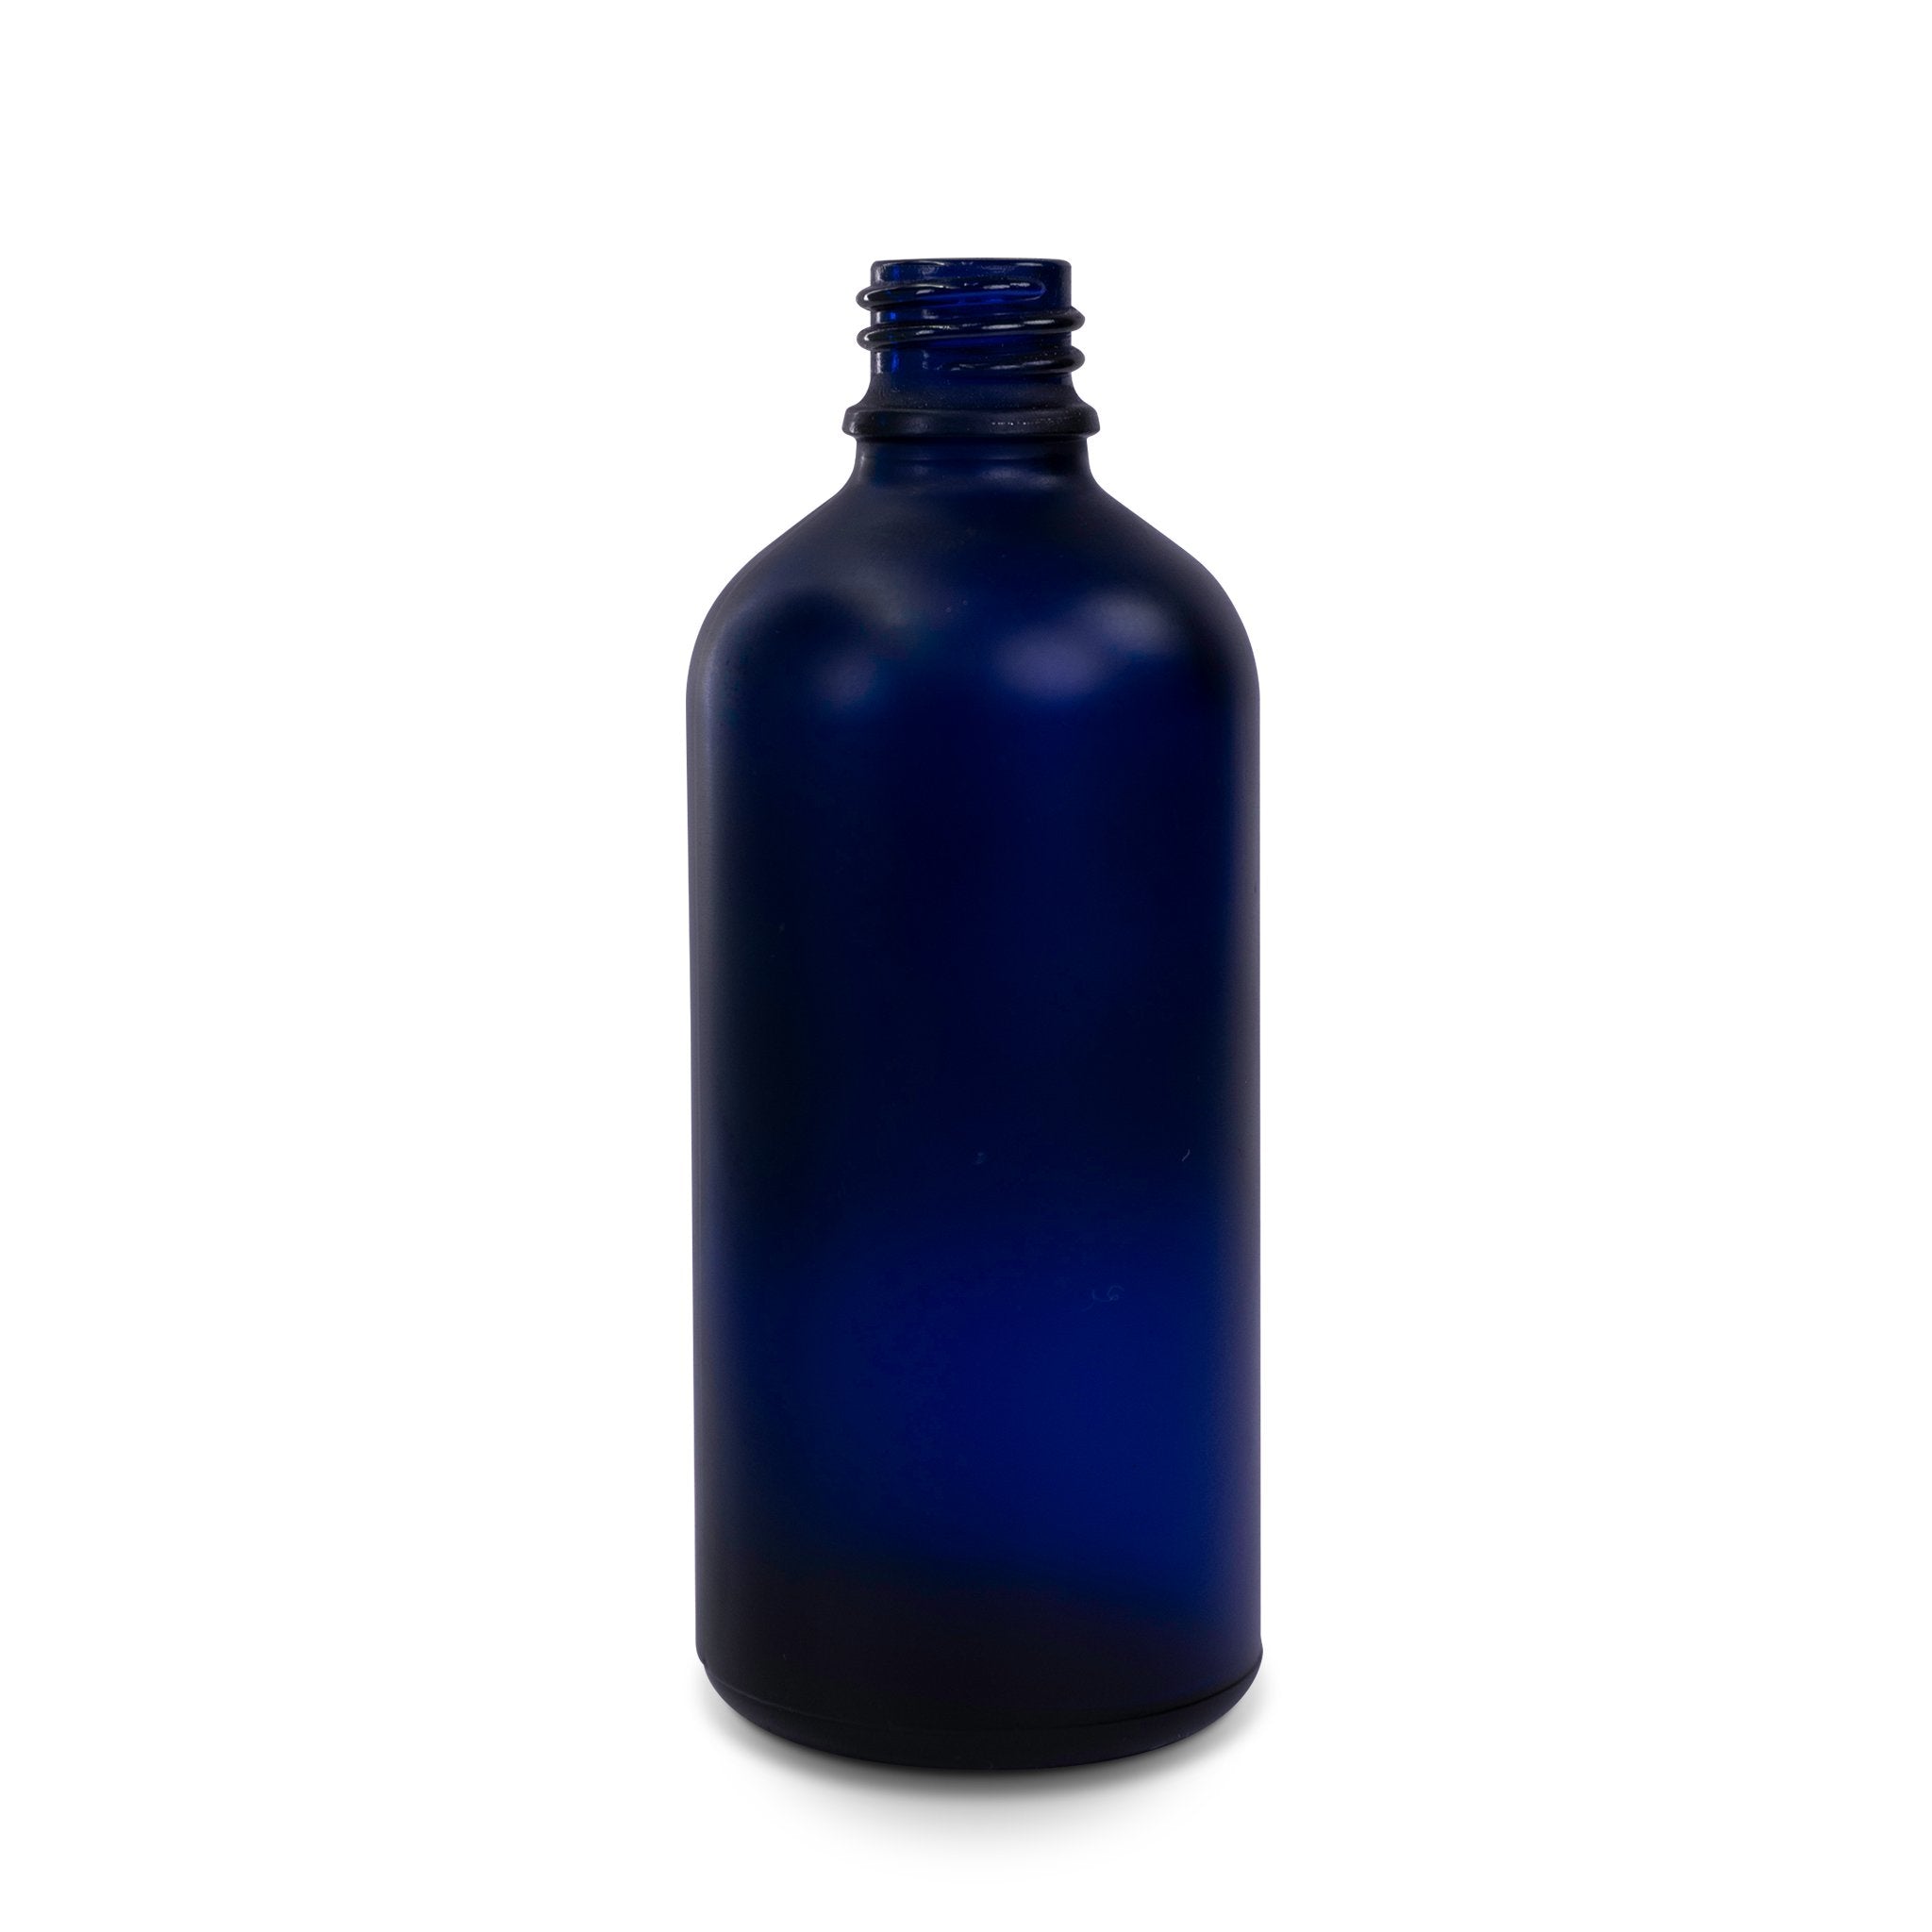 Stone Candles Supplies Bottle Room Spray and Diffuser Royal Blue